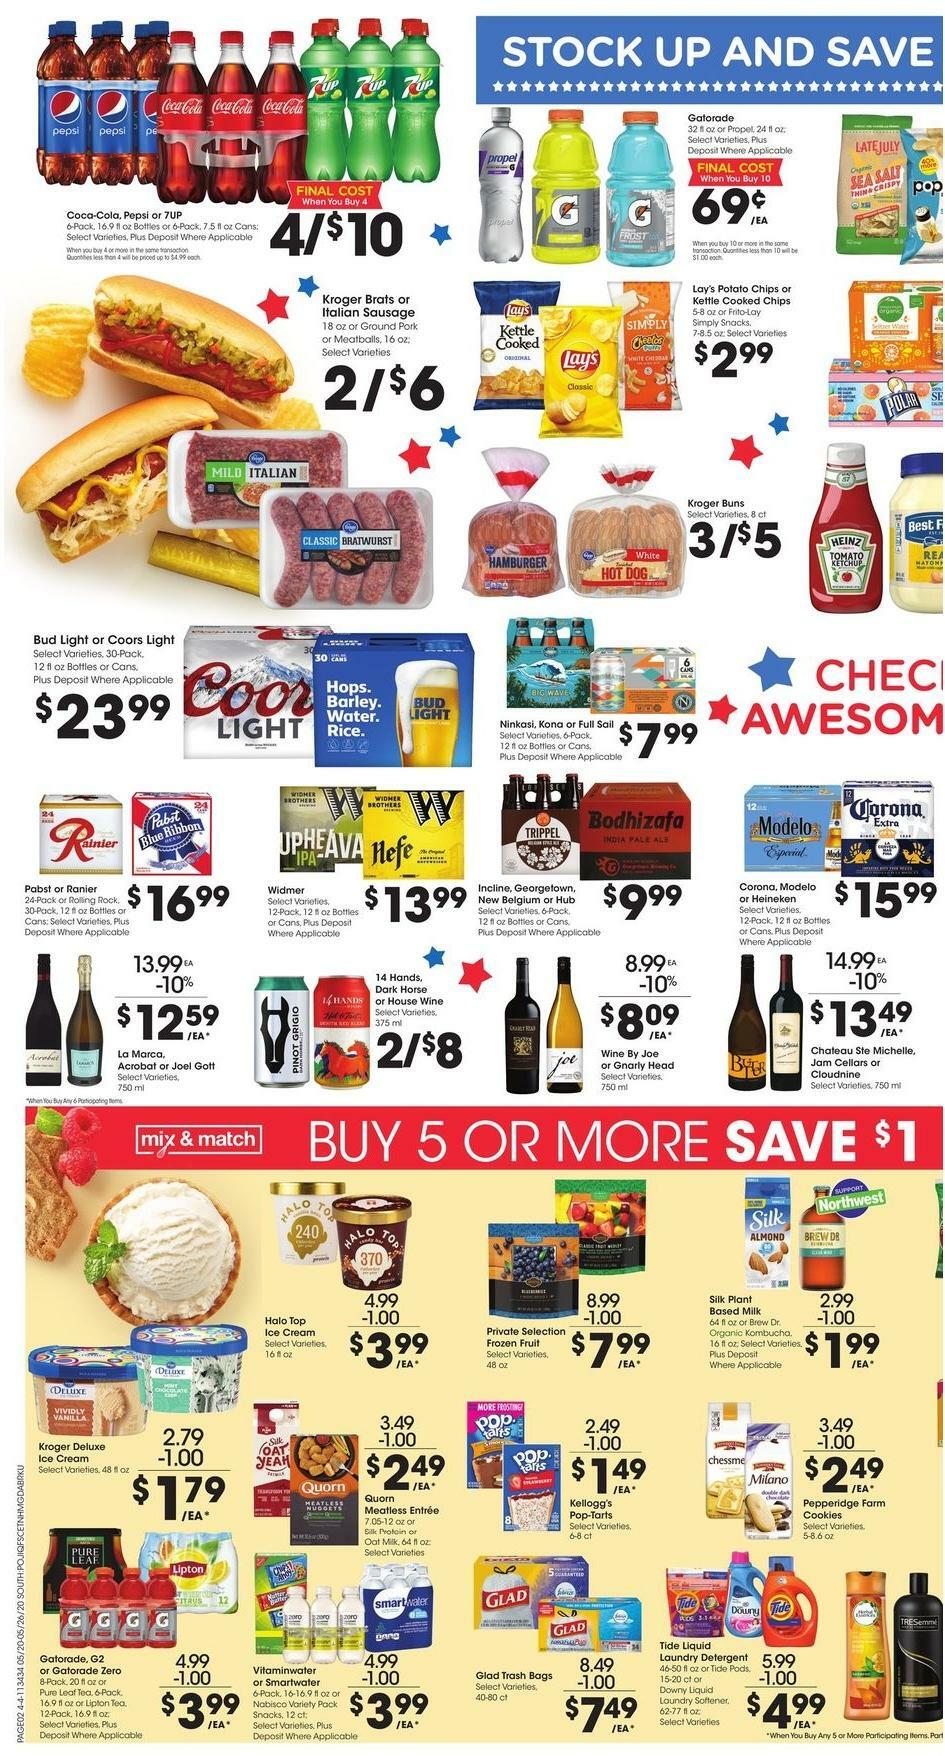 Fred Meyer Weekly Ad from May 20